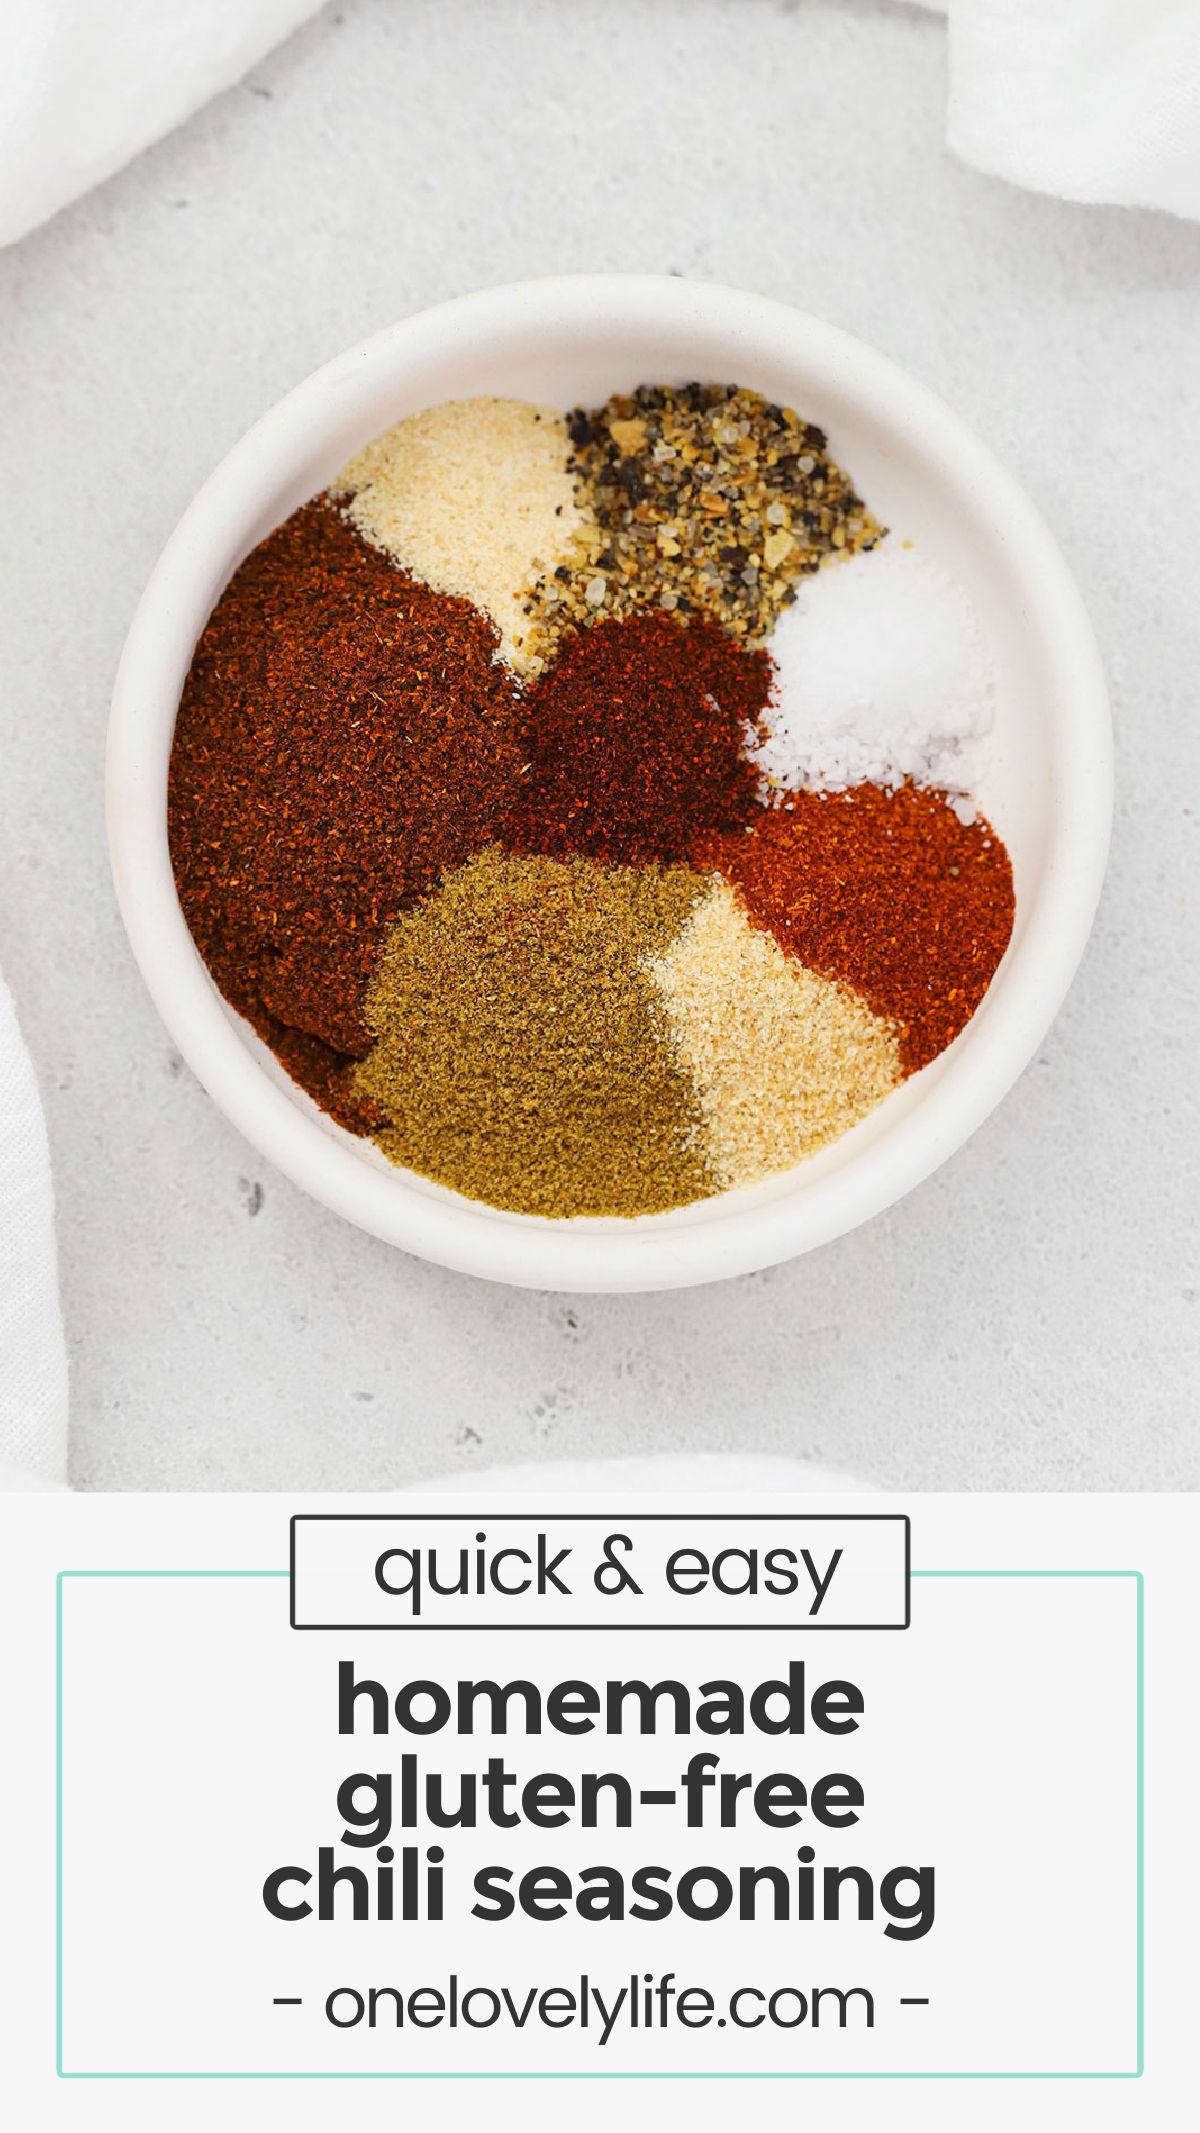 This easy gluten-free chili seasoning mix is a delicious blend that makes homemade chili taste incredible. (Naturally vegan, paleo & whole30) // gluten free chili seasoning / gluten free chili seasoning packet / the best gluten-free chili seasoning / gluten free chili seasoning brands / gluten free chili spices / gluten free chili spice mix / gluten free chili packet / gluten free spice mix / homemade chili seasoning / homemade gluten free chili seasoning